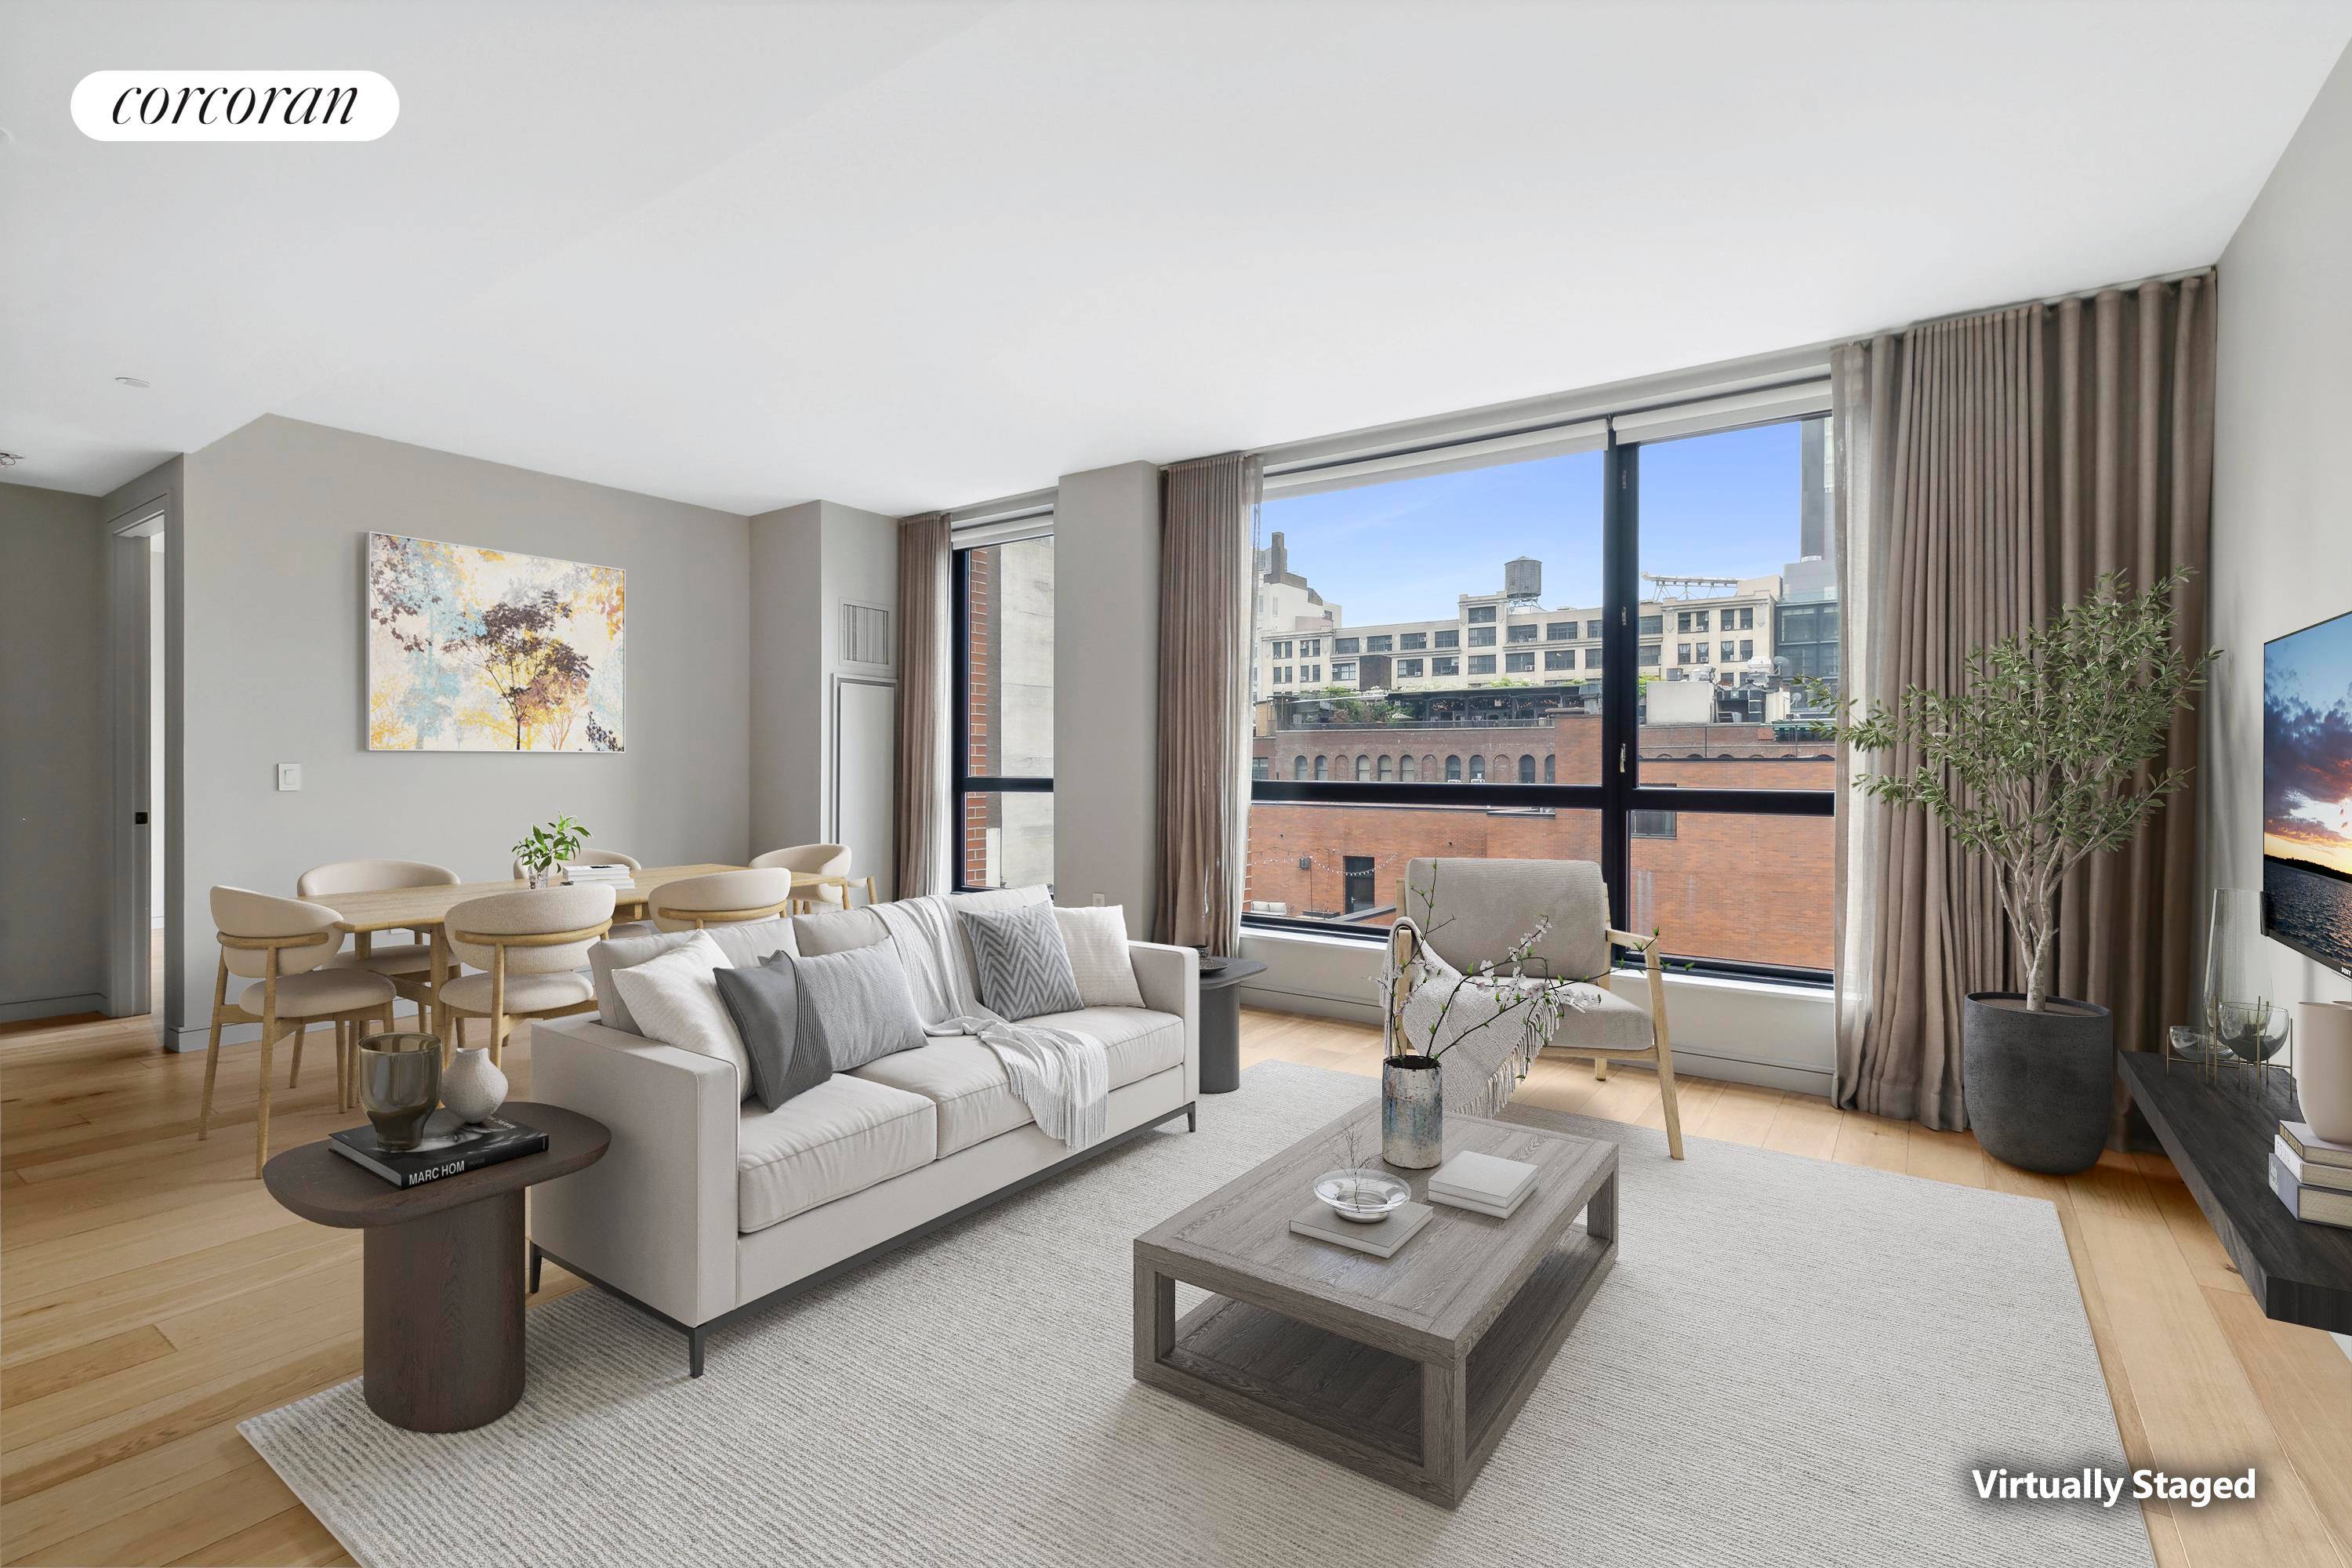 Luxury and prestige speak volumes in this remarkable one bedroom home at the Art, a Boutique Condominium on the Highline Park block entrance where Far West Chelsea meets Hudson Yards.